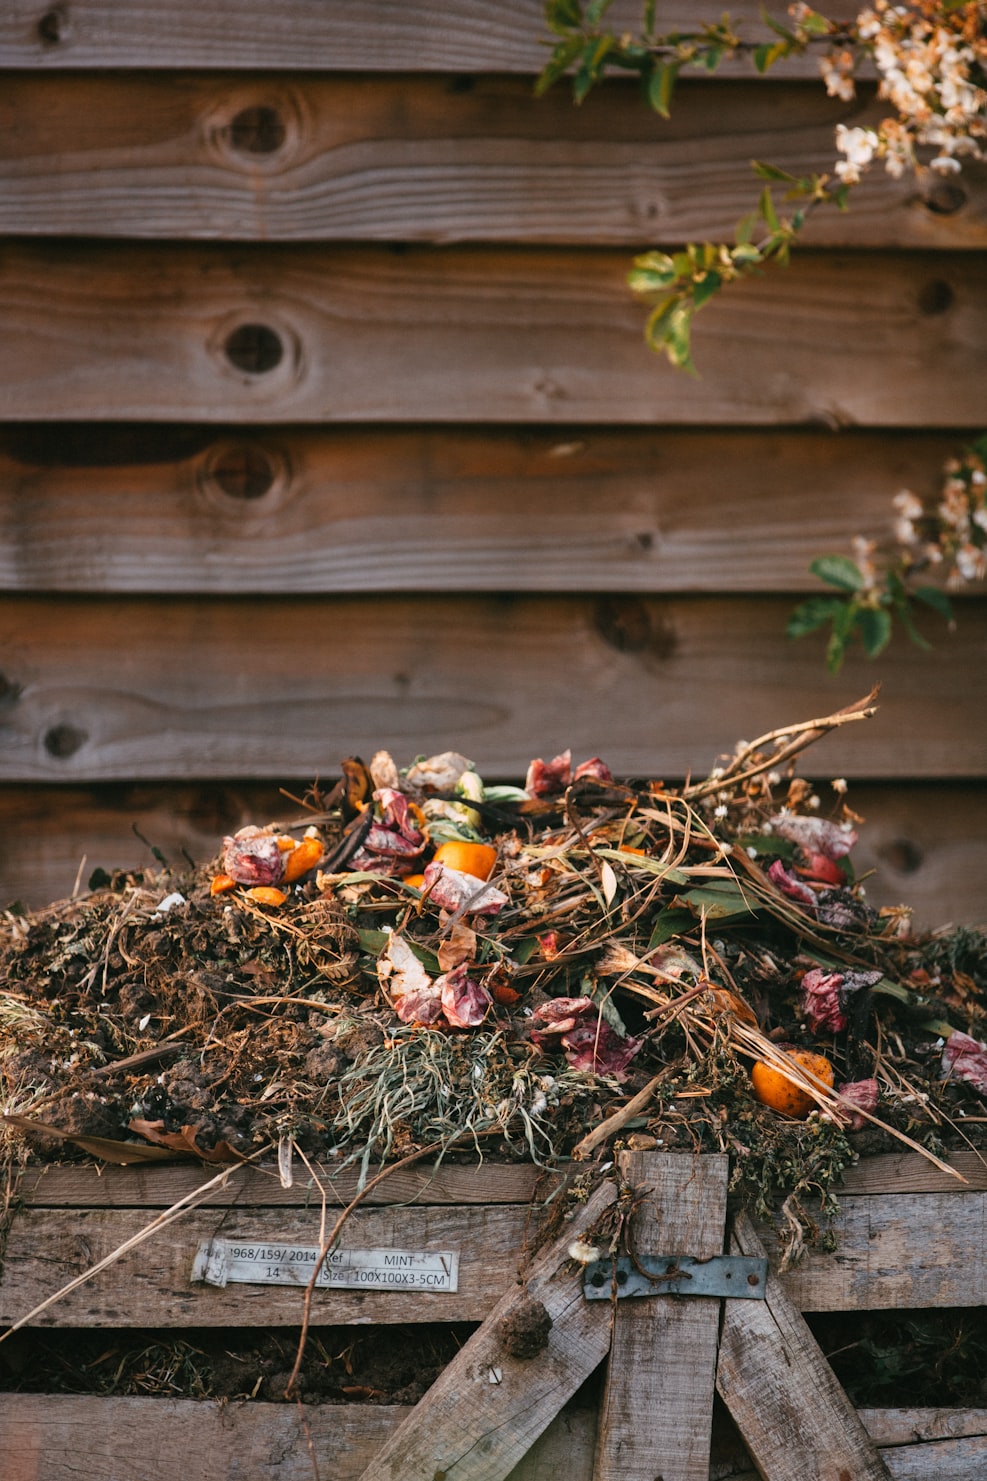 Image of a compost pile.